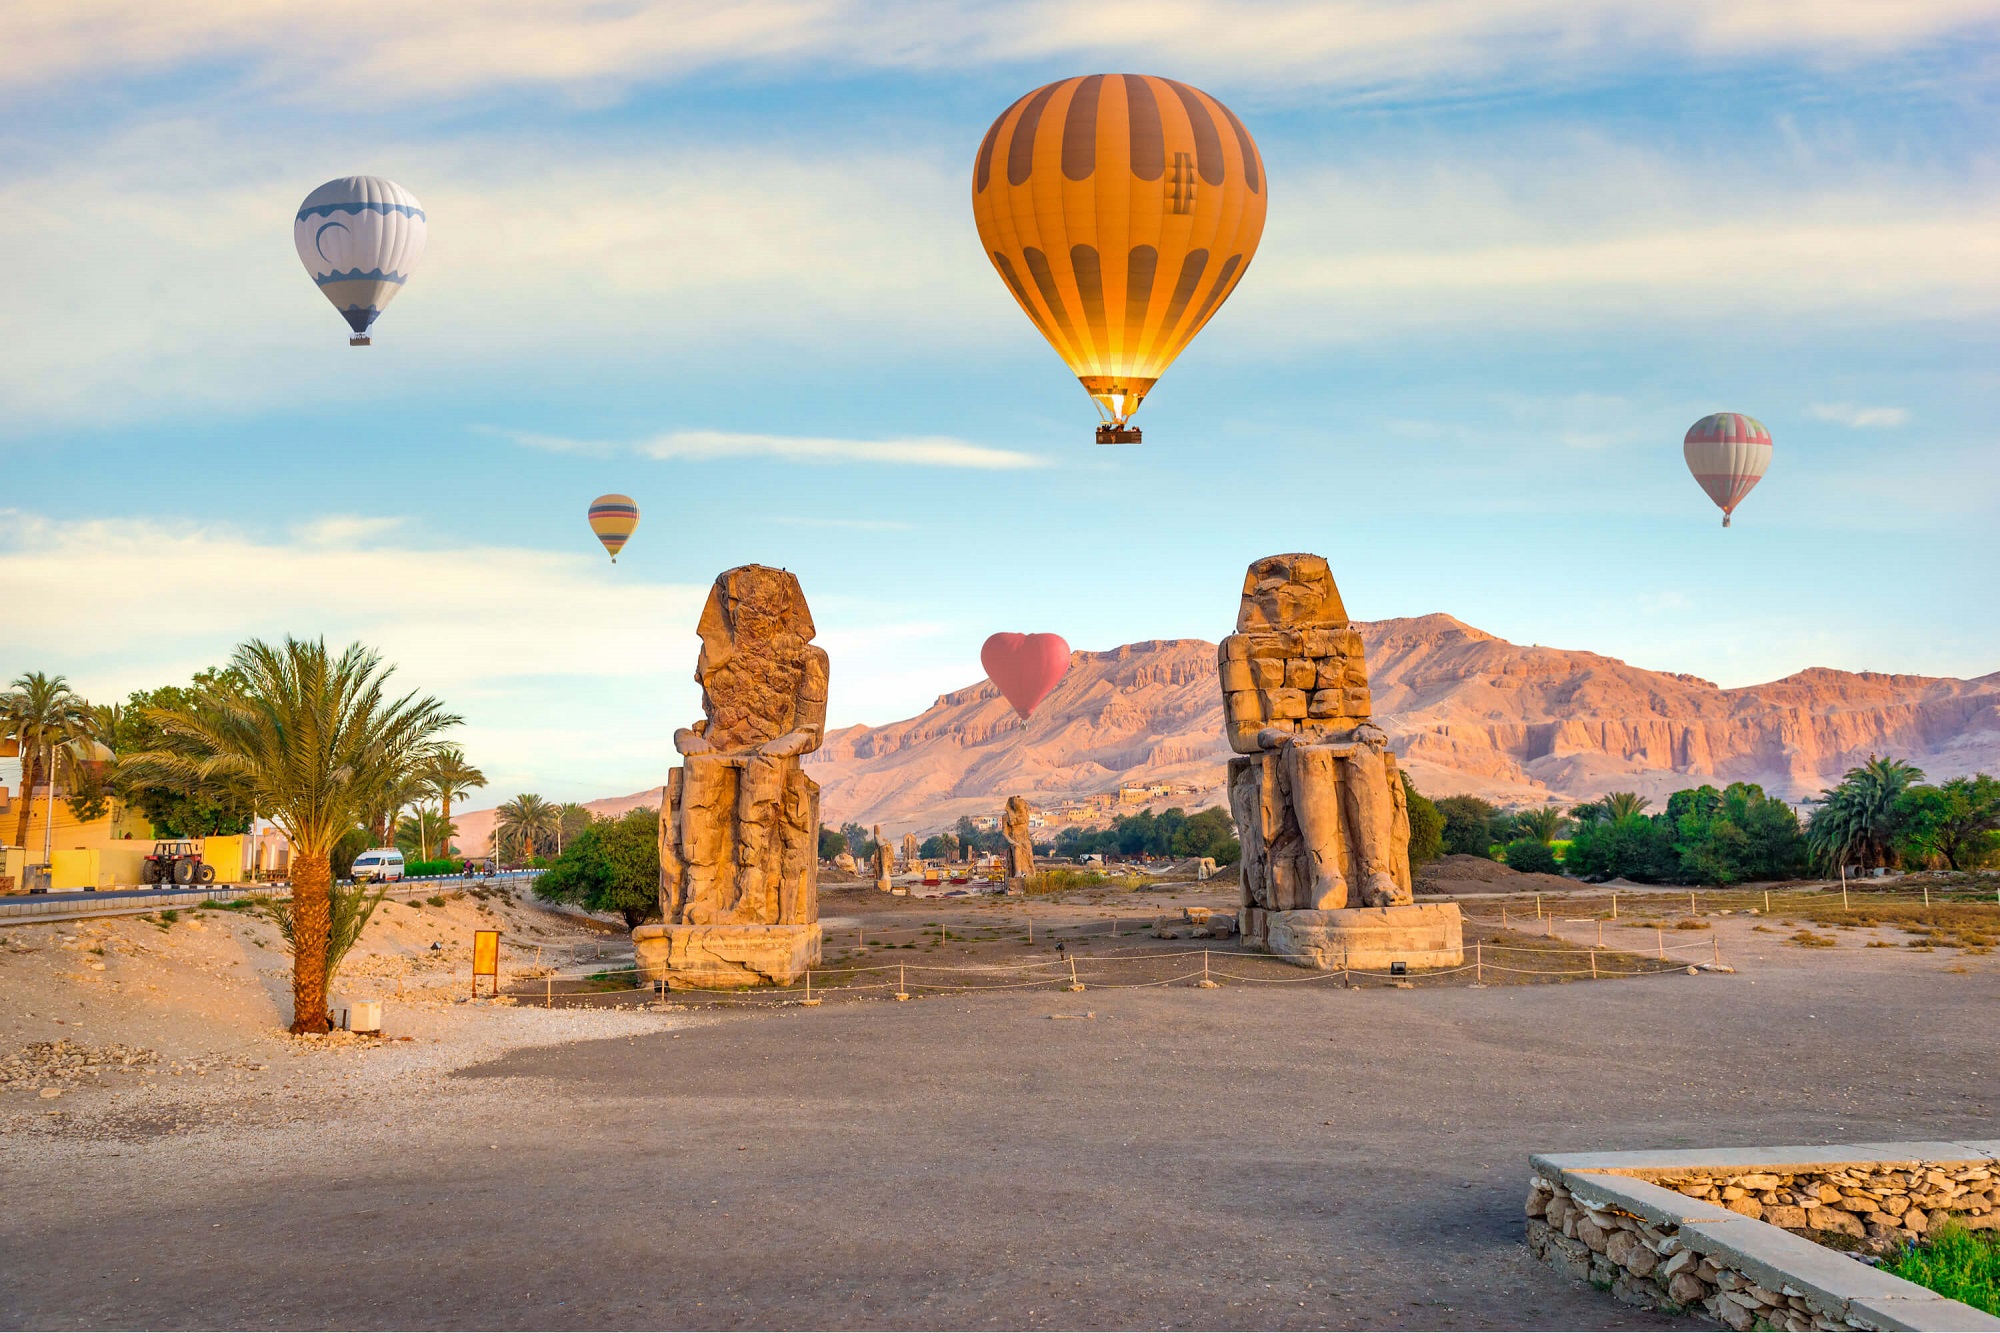 Travelers can witness hot air balloons drifting over ancient Egyptian ruins in the beautiful landscape below.